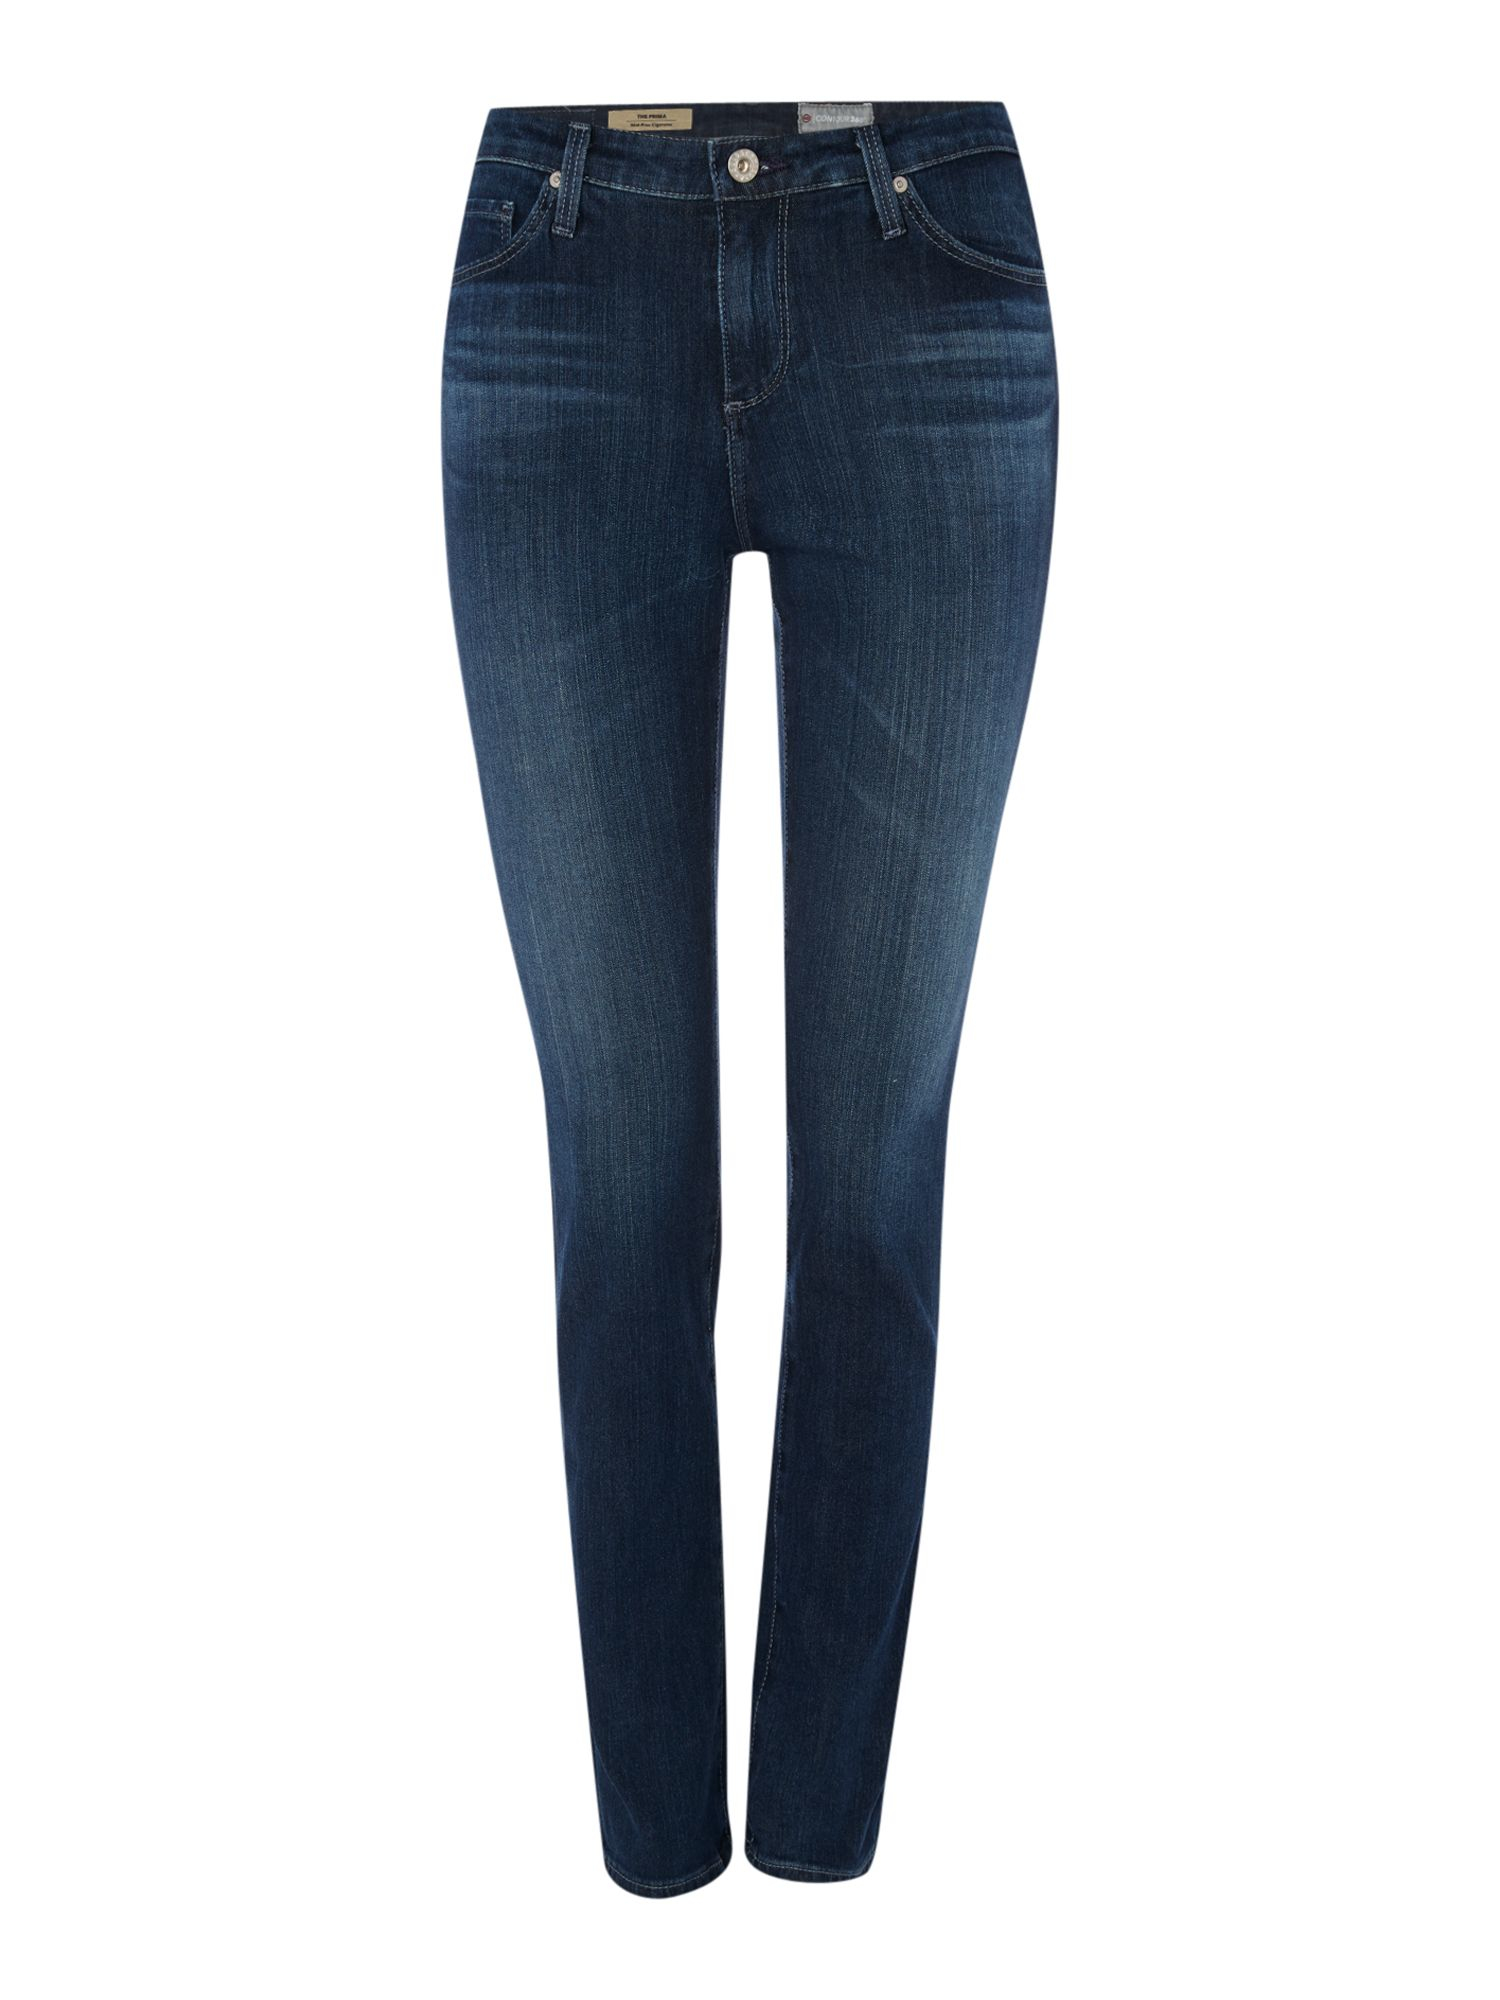 Ag jeans Prima Mid Rise Cigarette Jean In Crater in Blue | Lyst